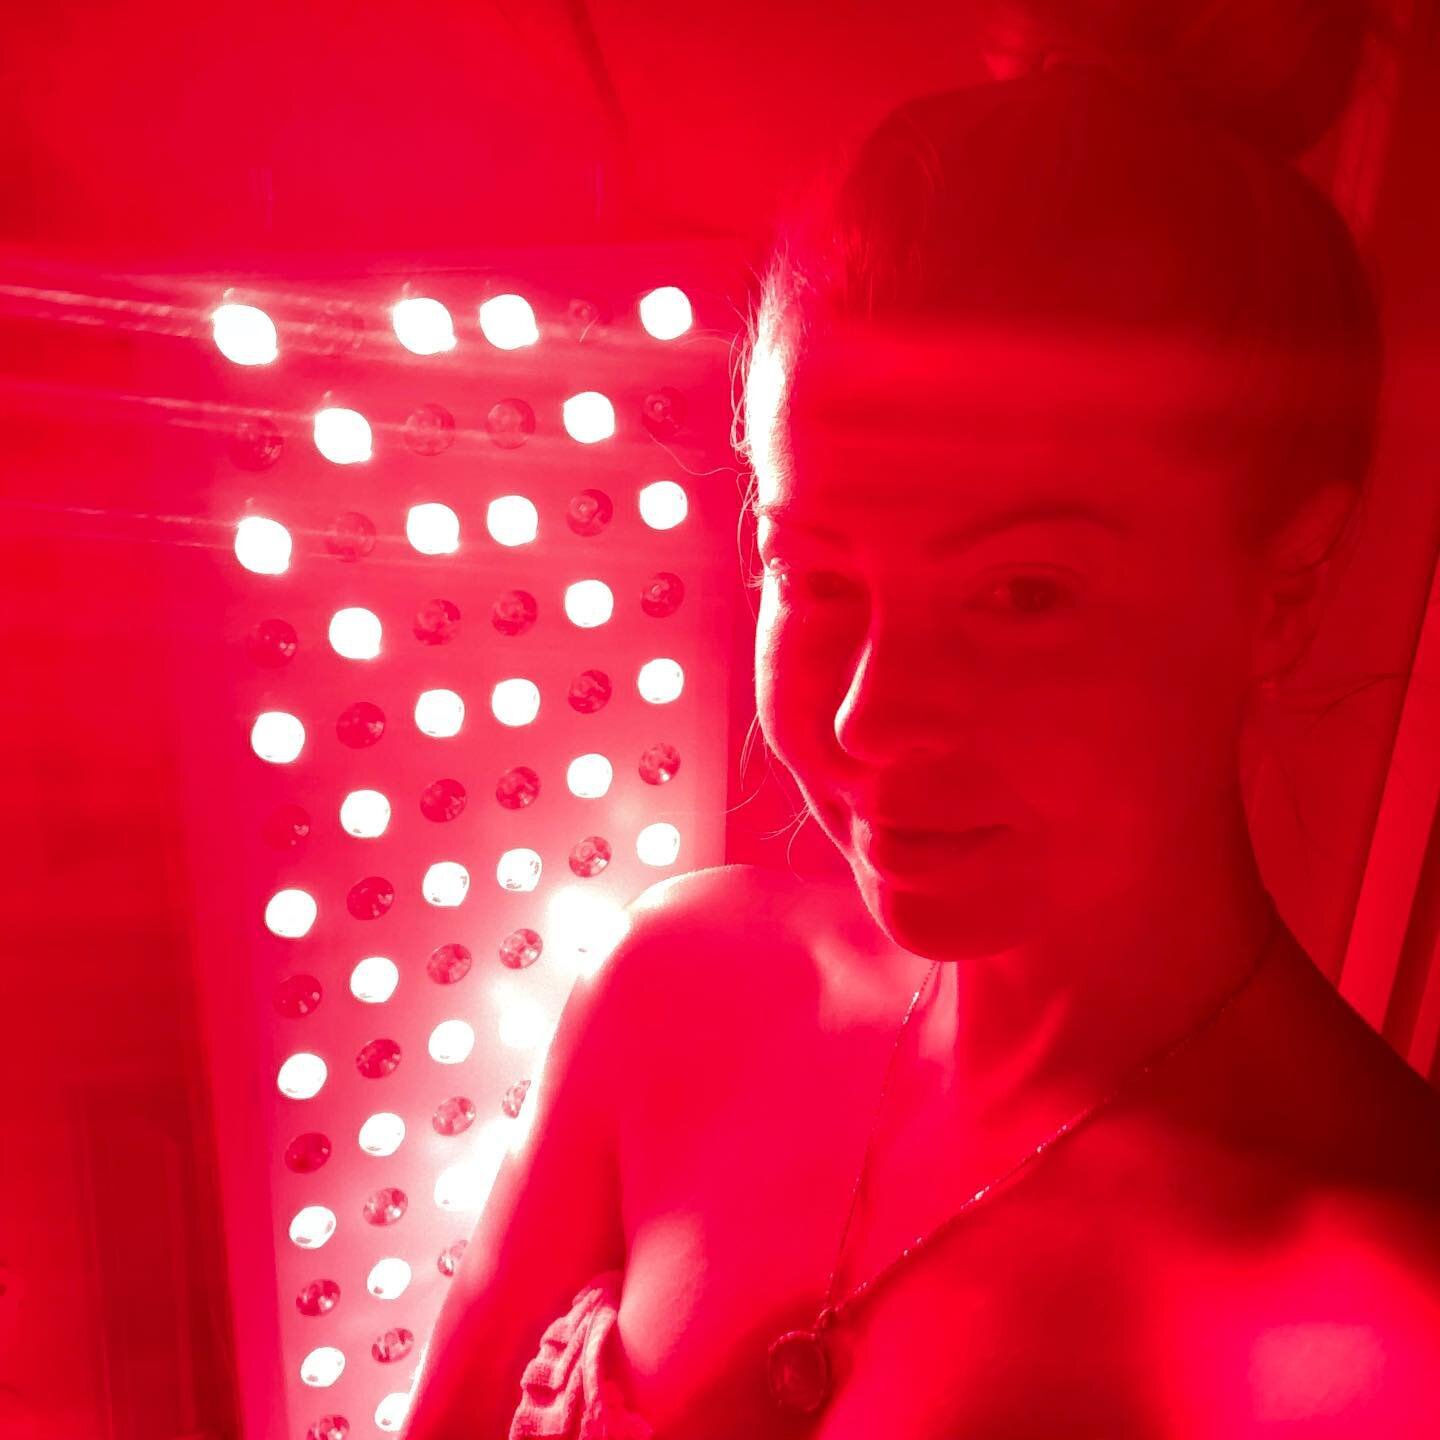 So excited to try redlighttherapy. So far so good. Feeling great after my first 10 min session! Thanks @joovvsocial
.
.
.
#joovv #joovvlight #redlight #infrared #nir #redlighttheraphy #energy #boost #recovery #body #biohack #health #wellness